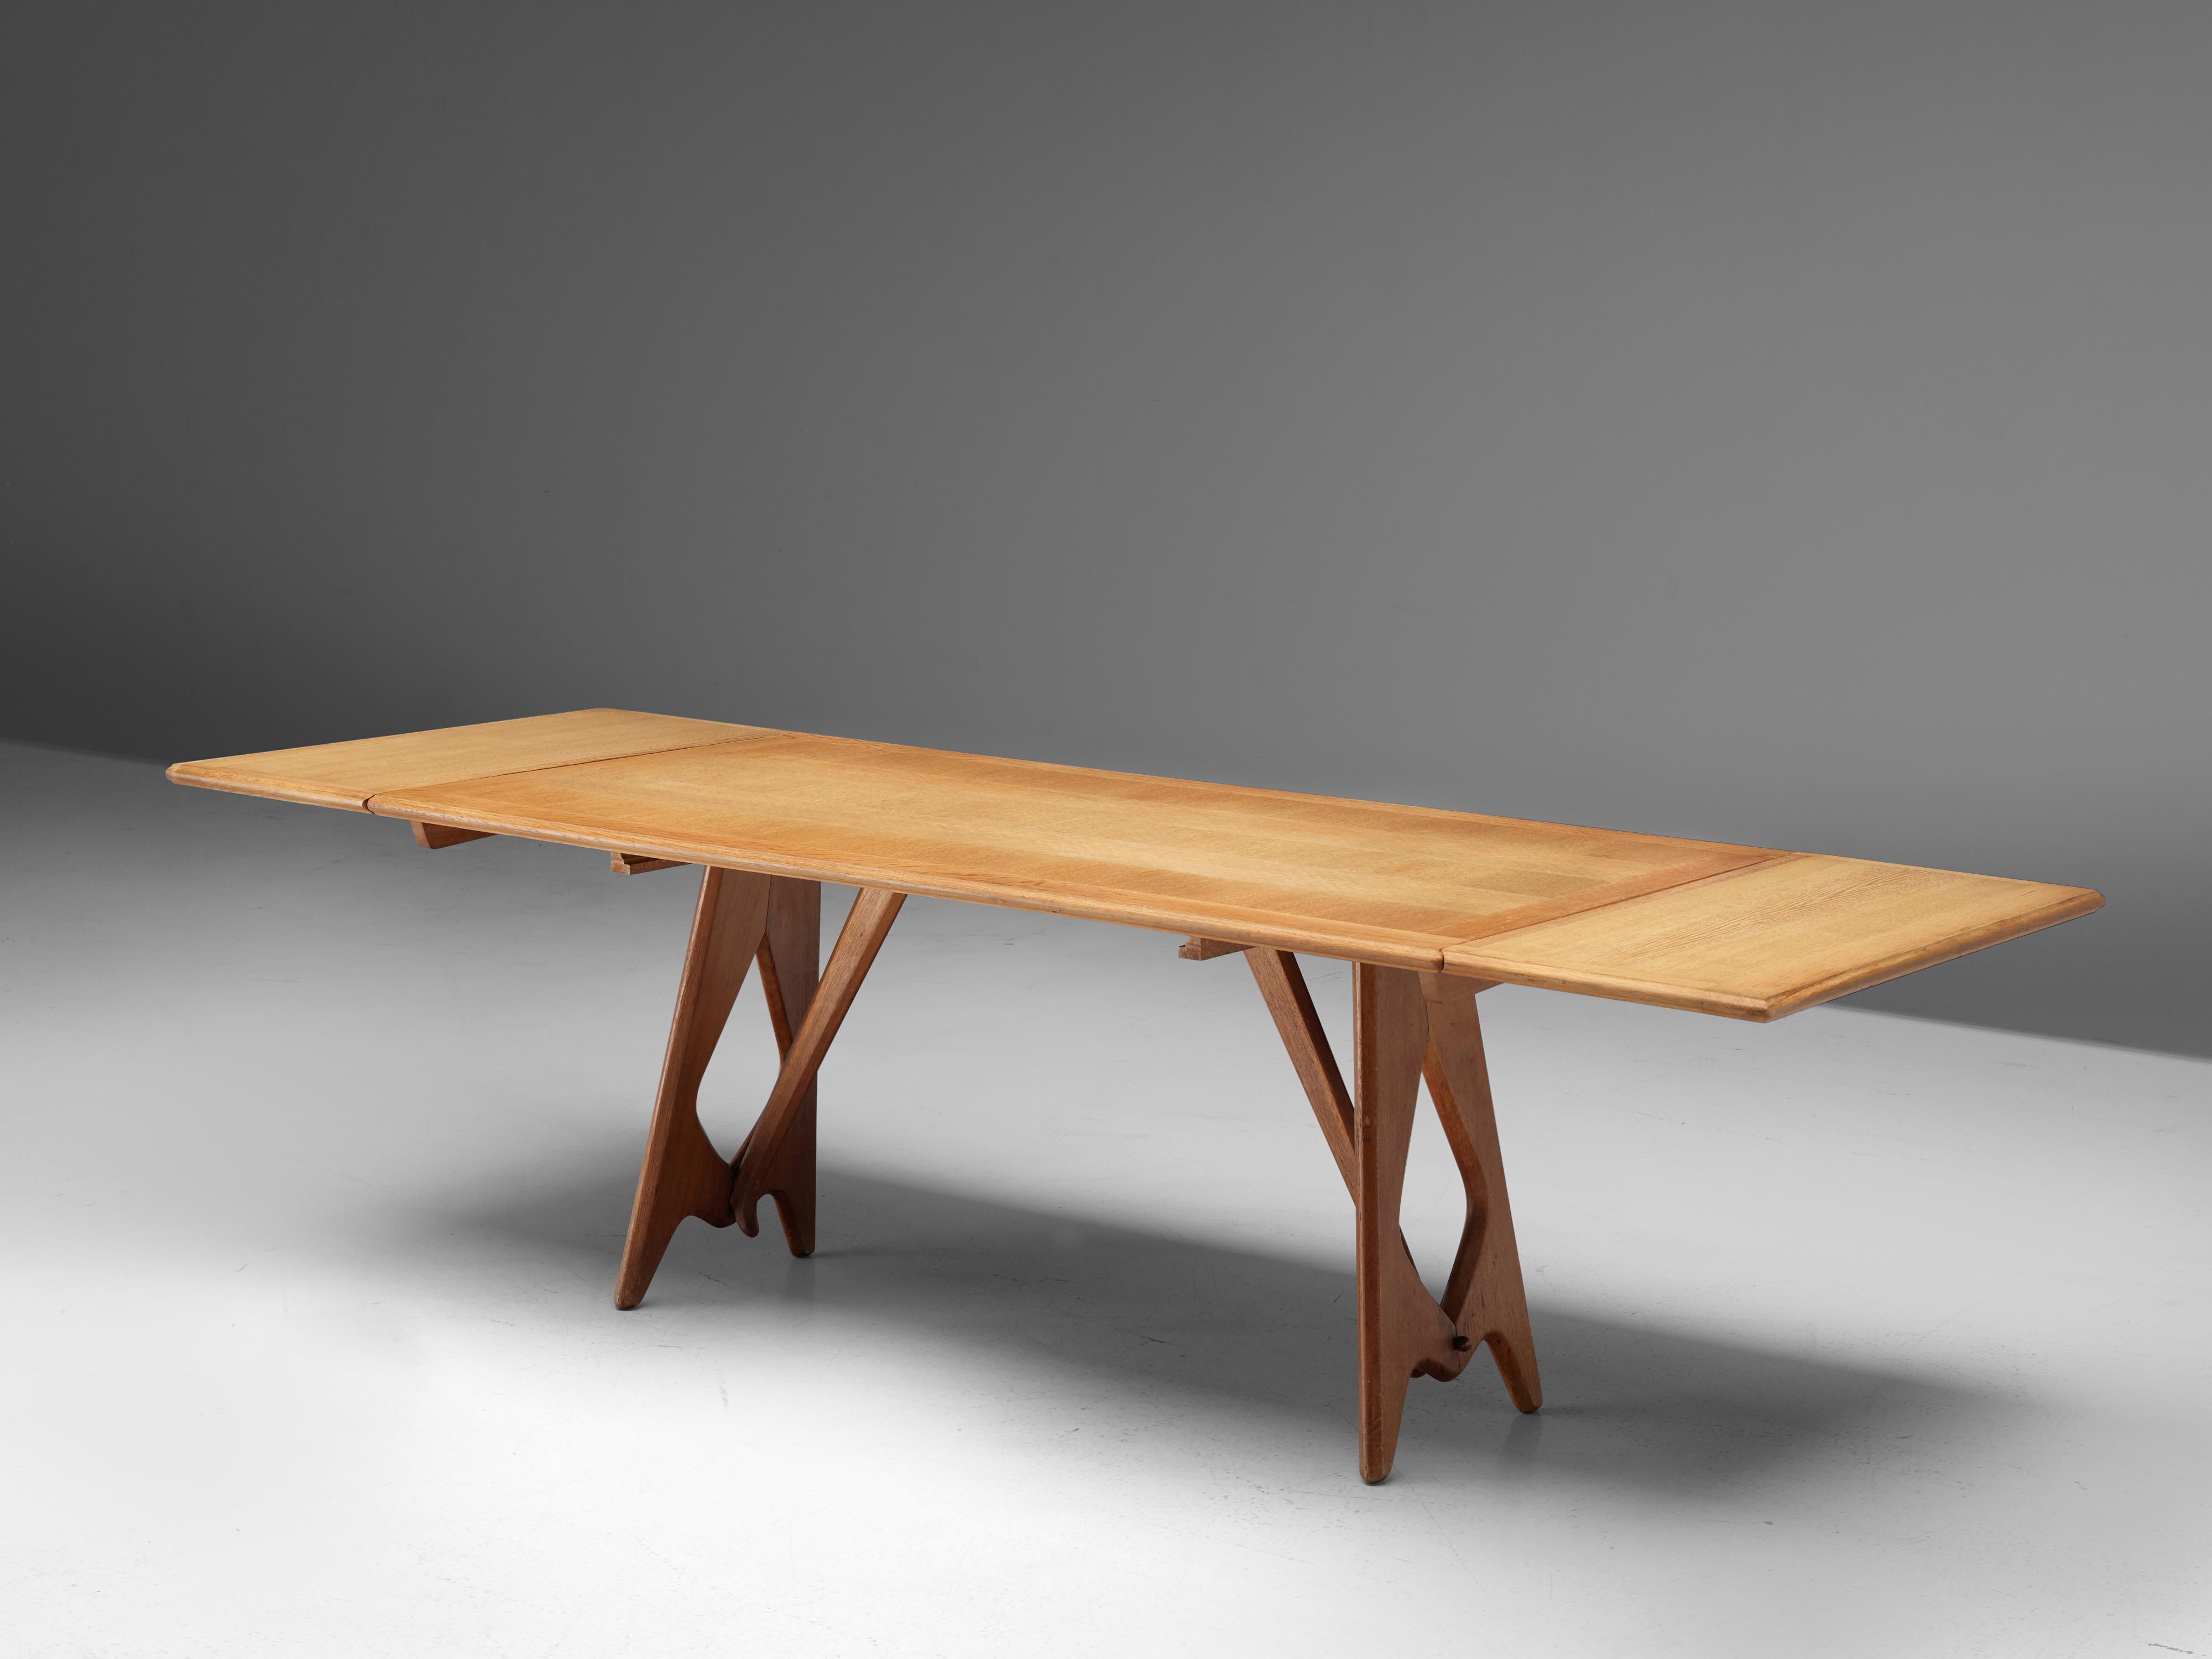 Guillerme et Chambron, dining table, oak, France, 1960s

Extendable dining table by French designer duo Jacques Chambron and Robert Guillerme. The legs of this table are beautifully shaped and show nice organic forms. The top is rectangular with to